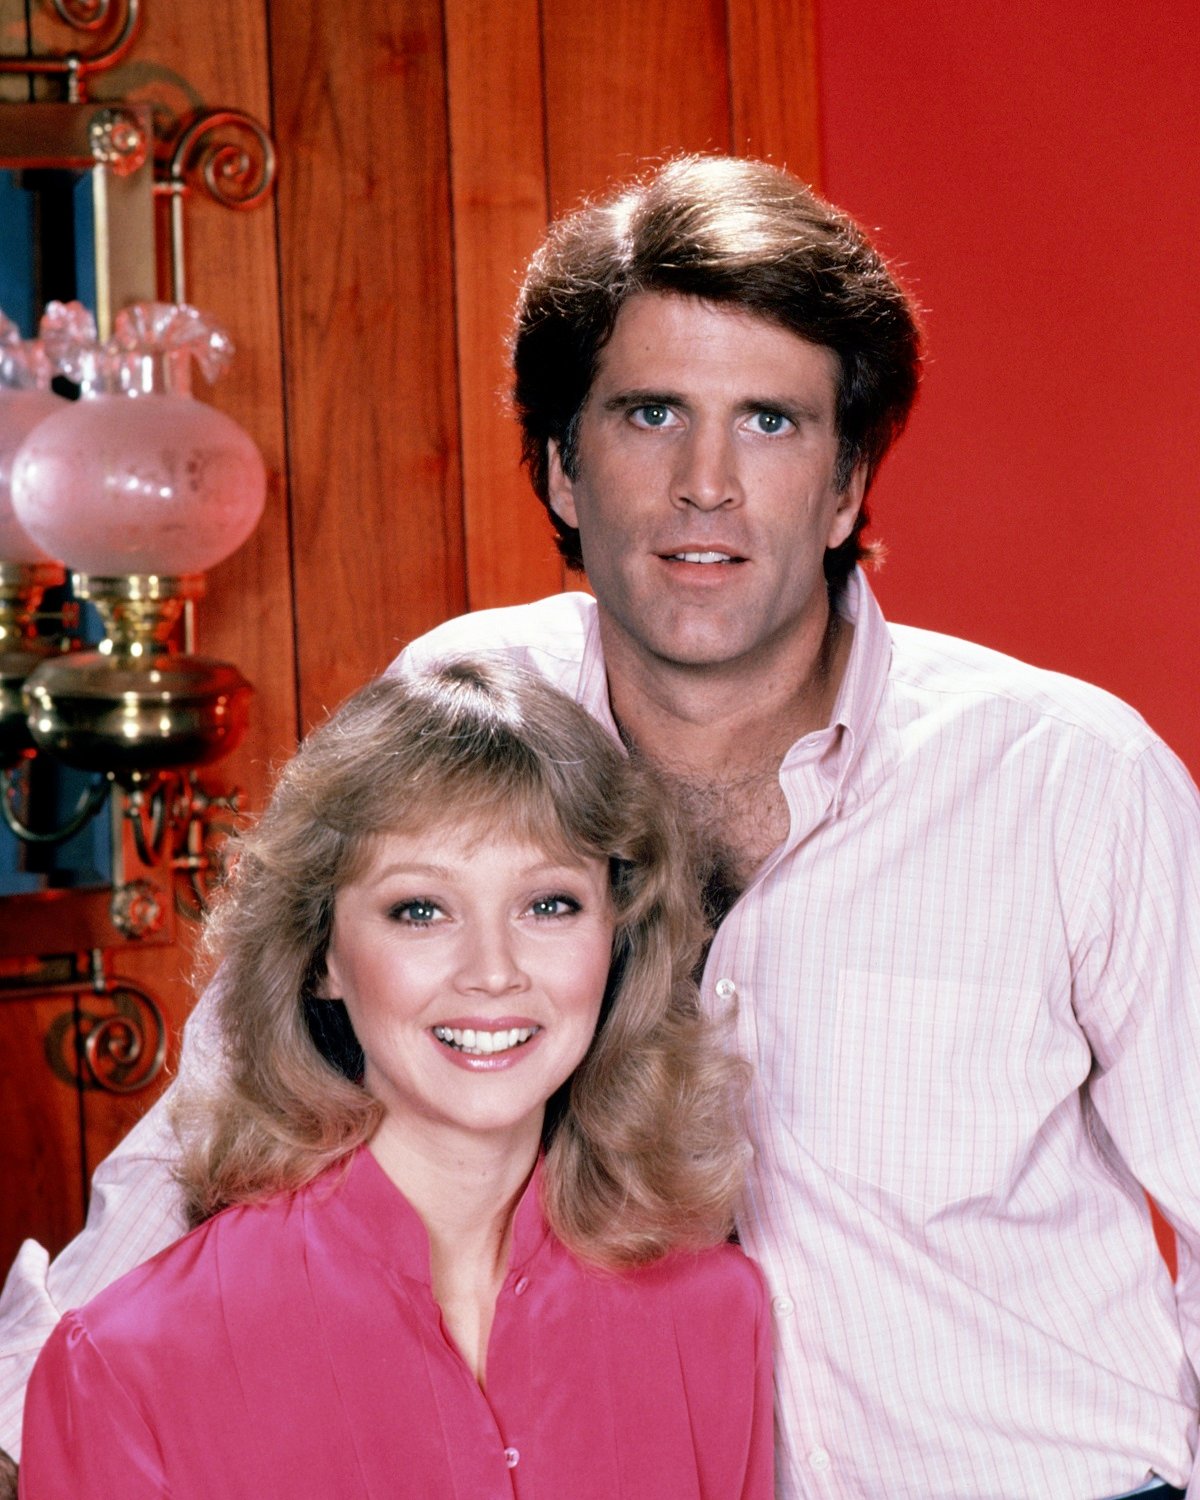 Ted Danson as Sam Malone and Shelley Long as Diane Chambers in the TV sitcom 'Cheers'